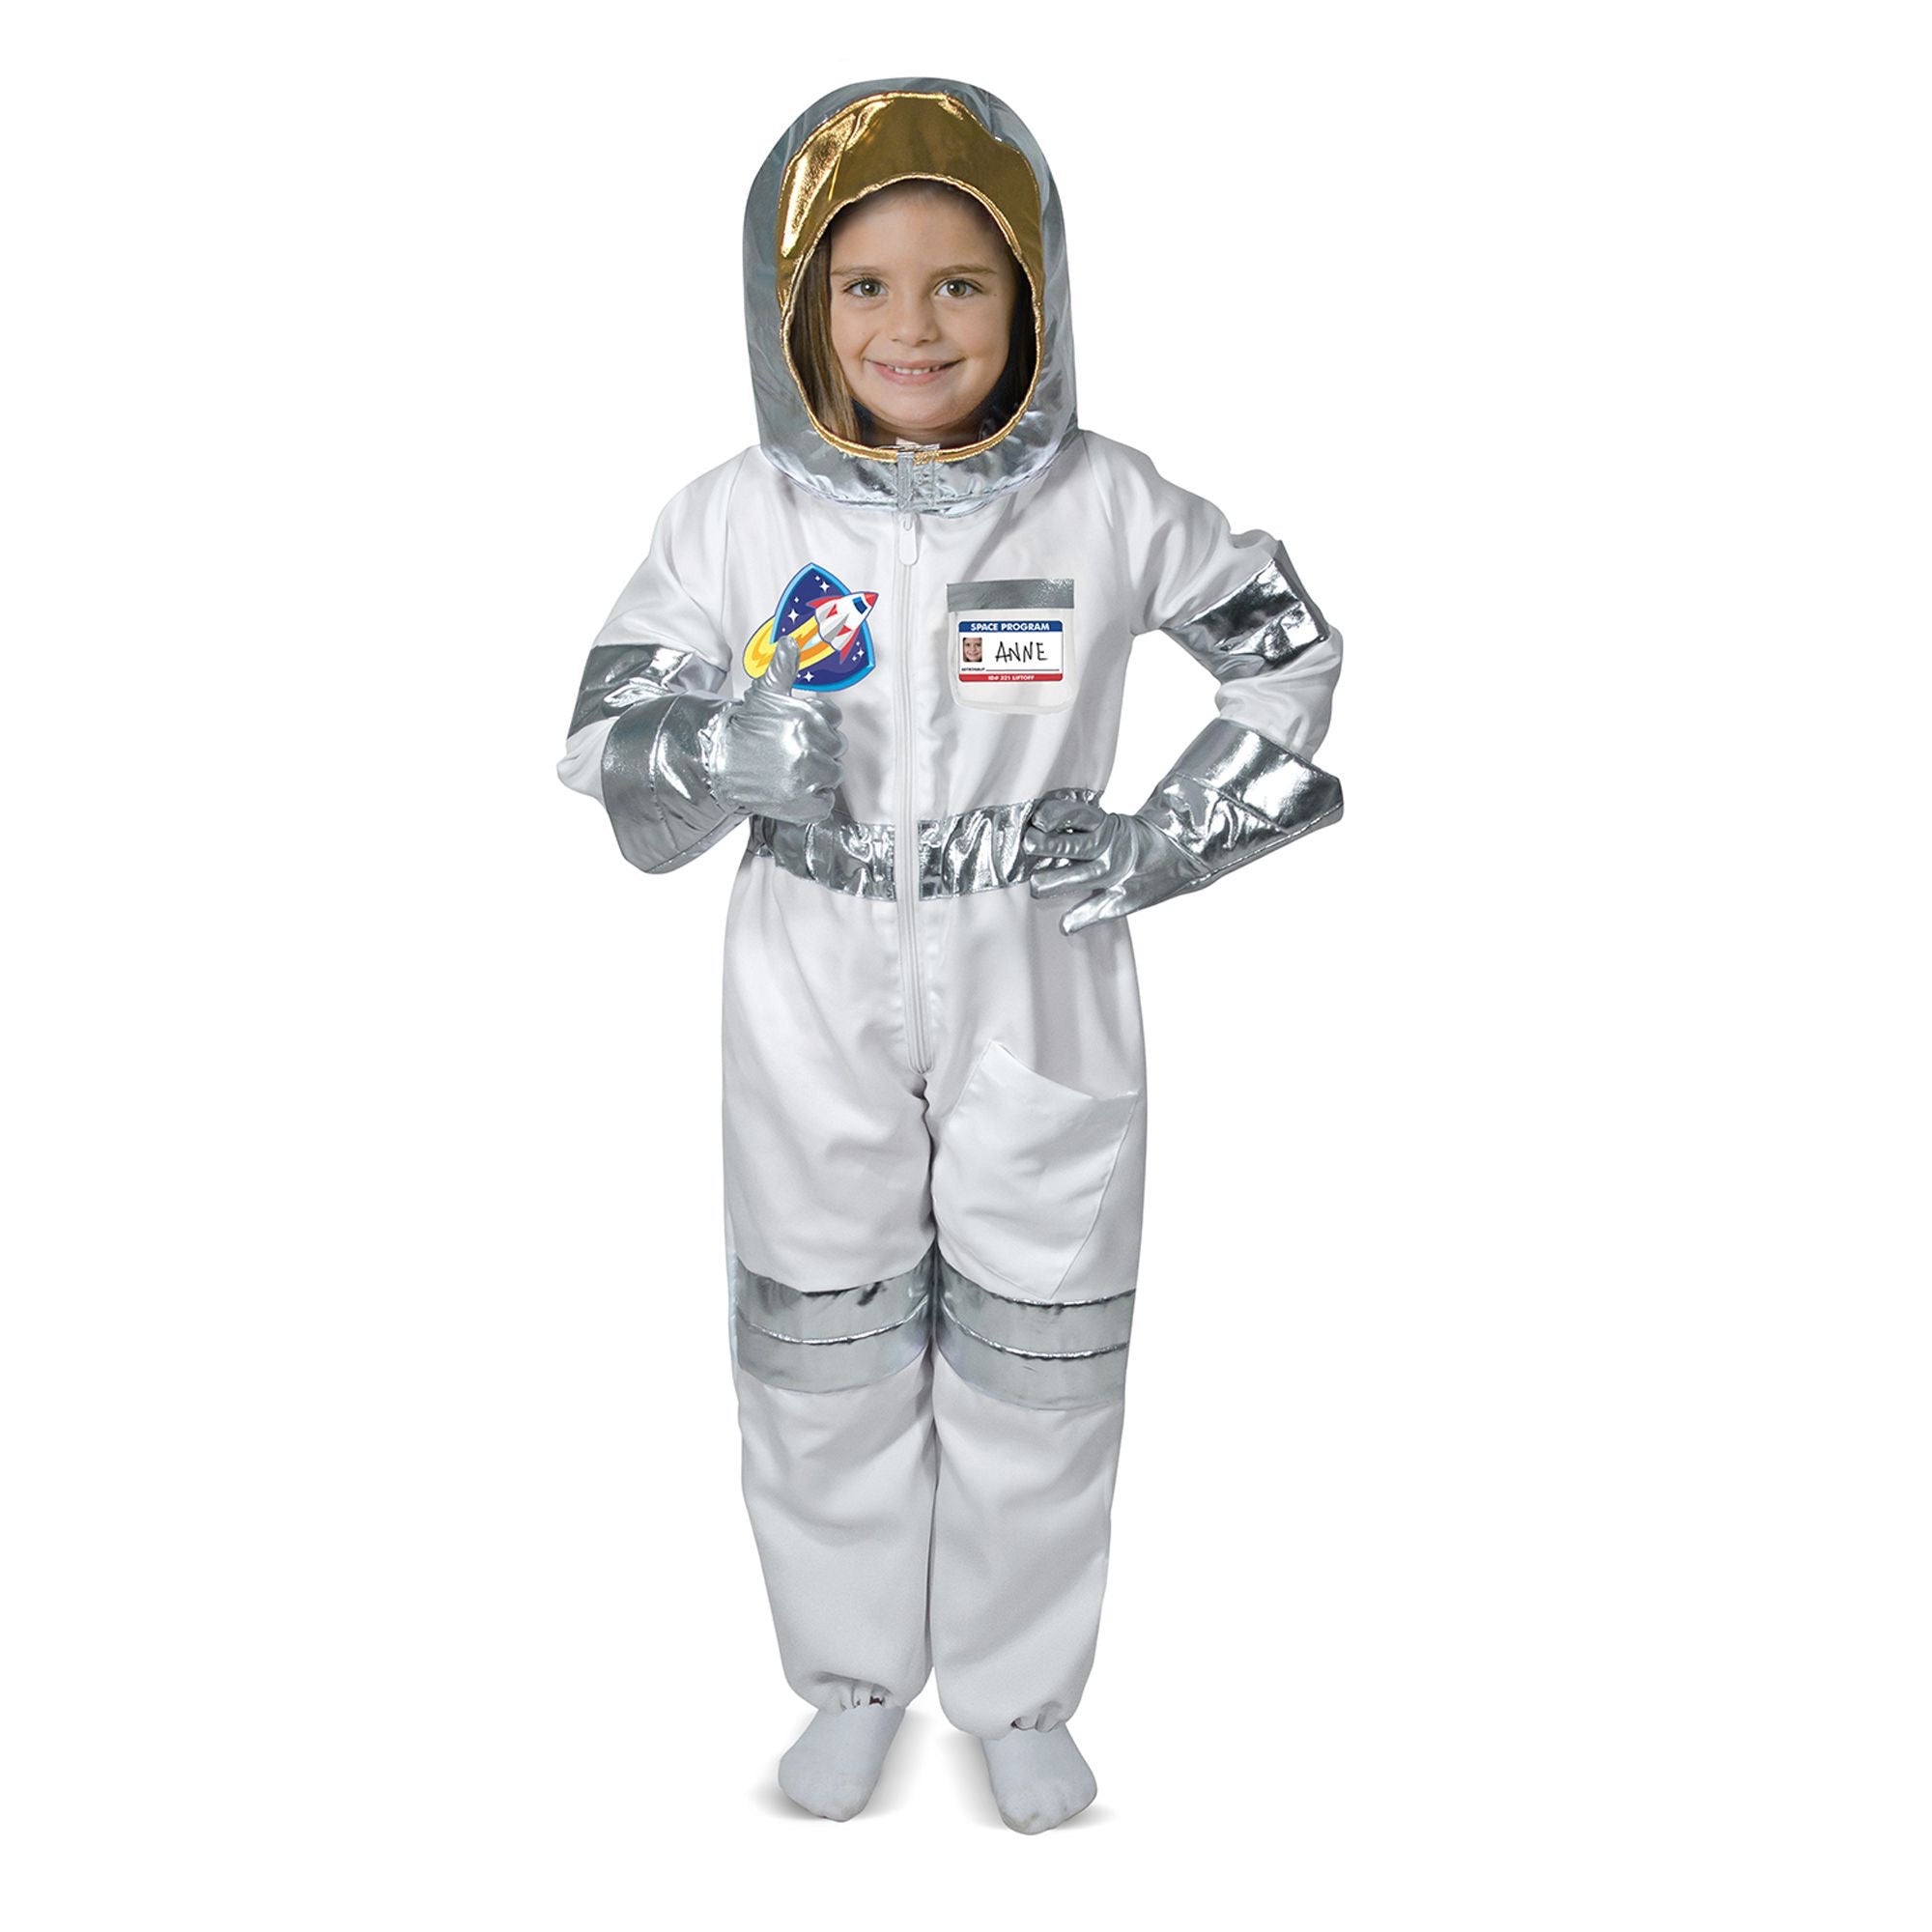 Astronaut Role Play Dressup Costume by Melissa & Doug #8503